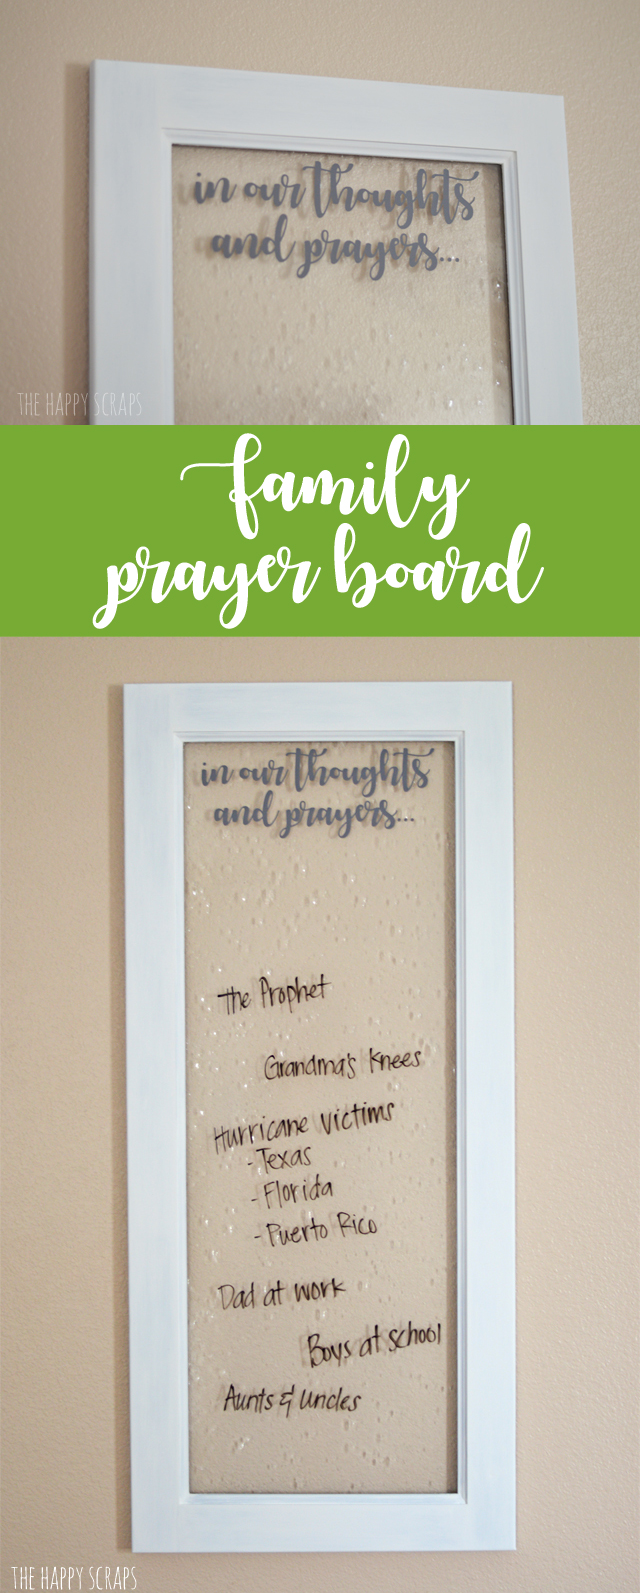 This Family Prayer Board has been a great way for our family to remember the things that we'd like to be praying for when we have family prayer. 